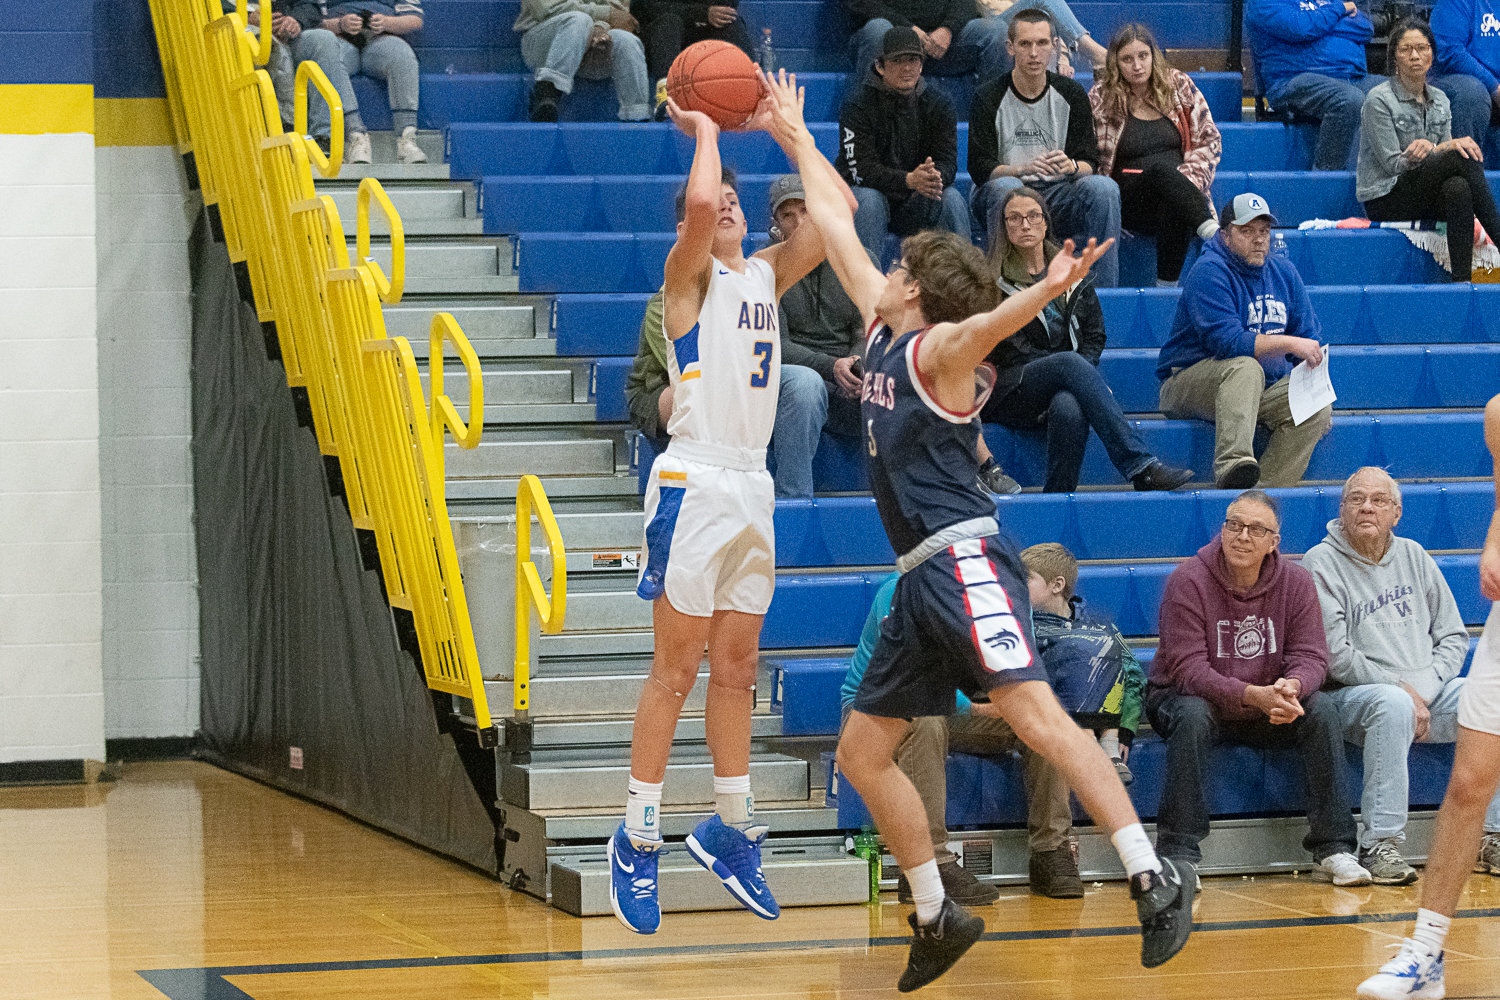 Adna's Braeden Salme puts up a 3-pointer during the first half of the Pirates' 67-60 win over Black Hills on Nov. 29.